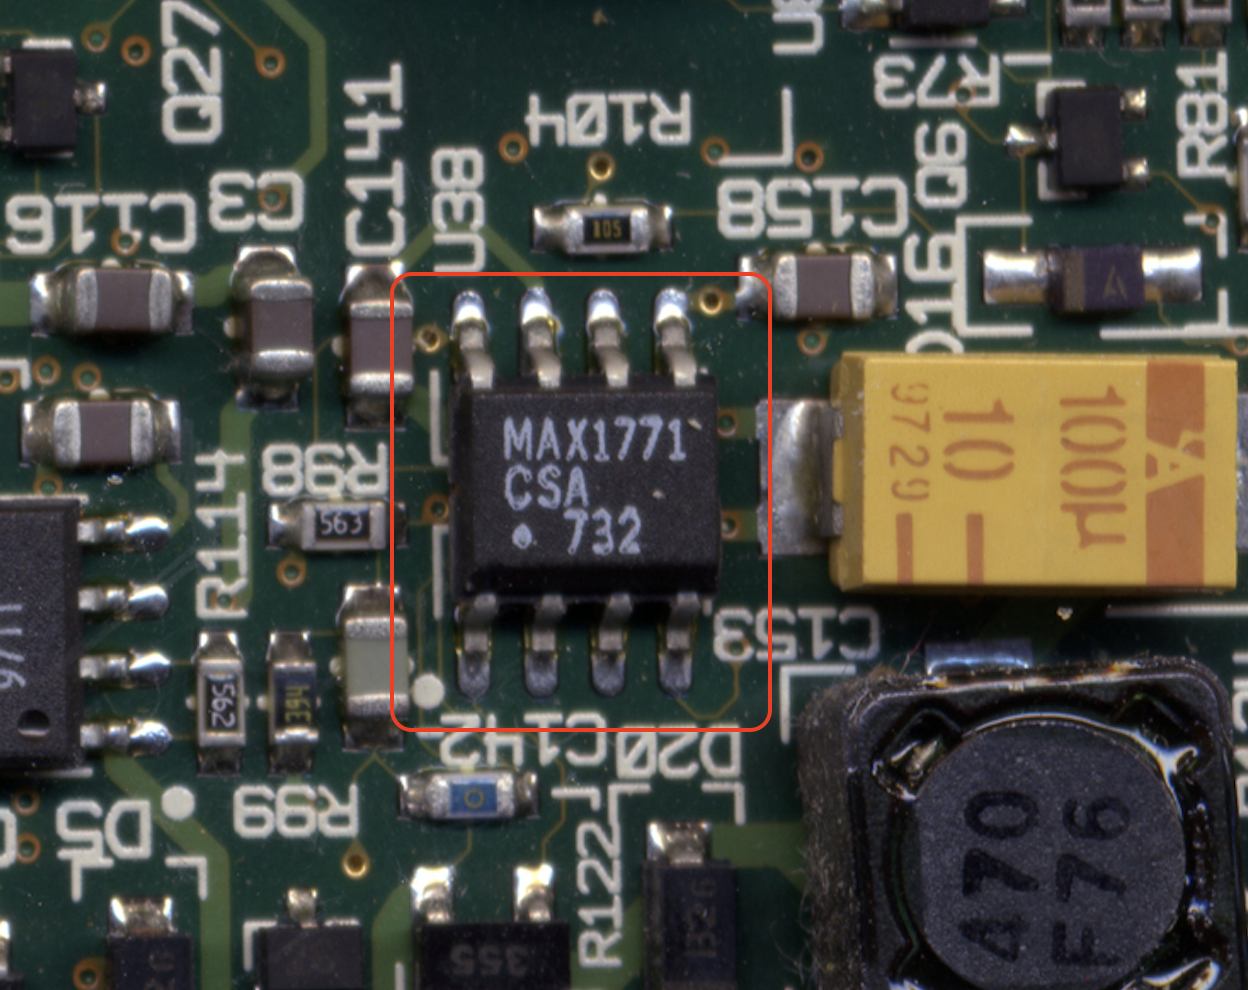 newton-2100-board-top-rom-removed-max1771 highlighted